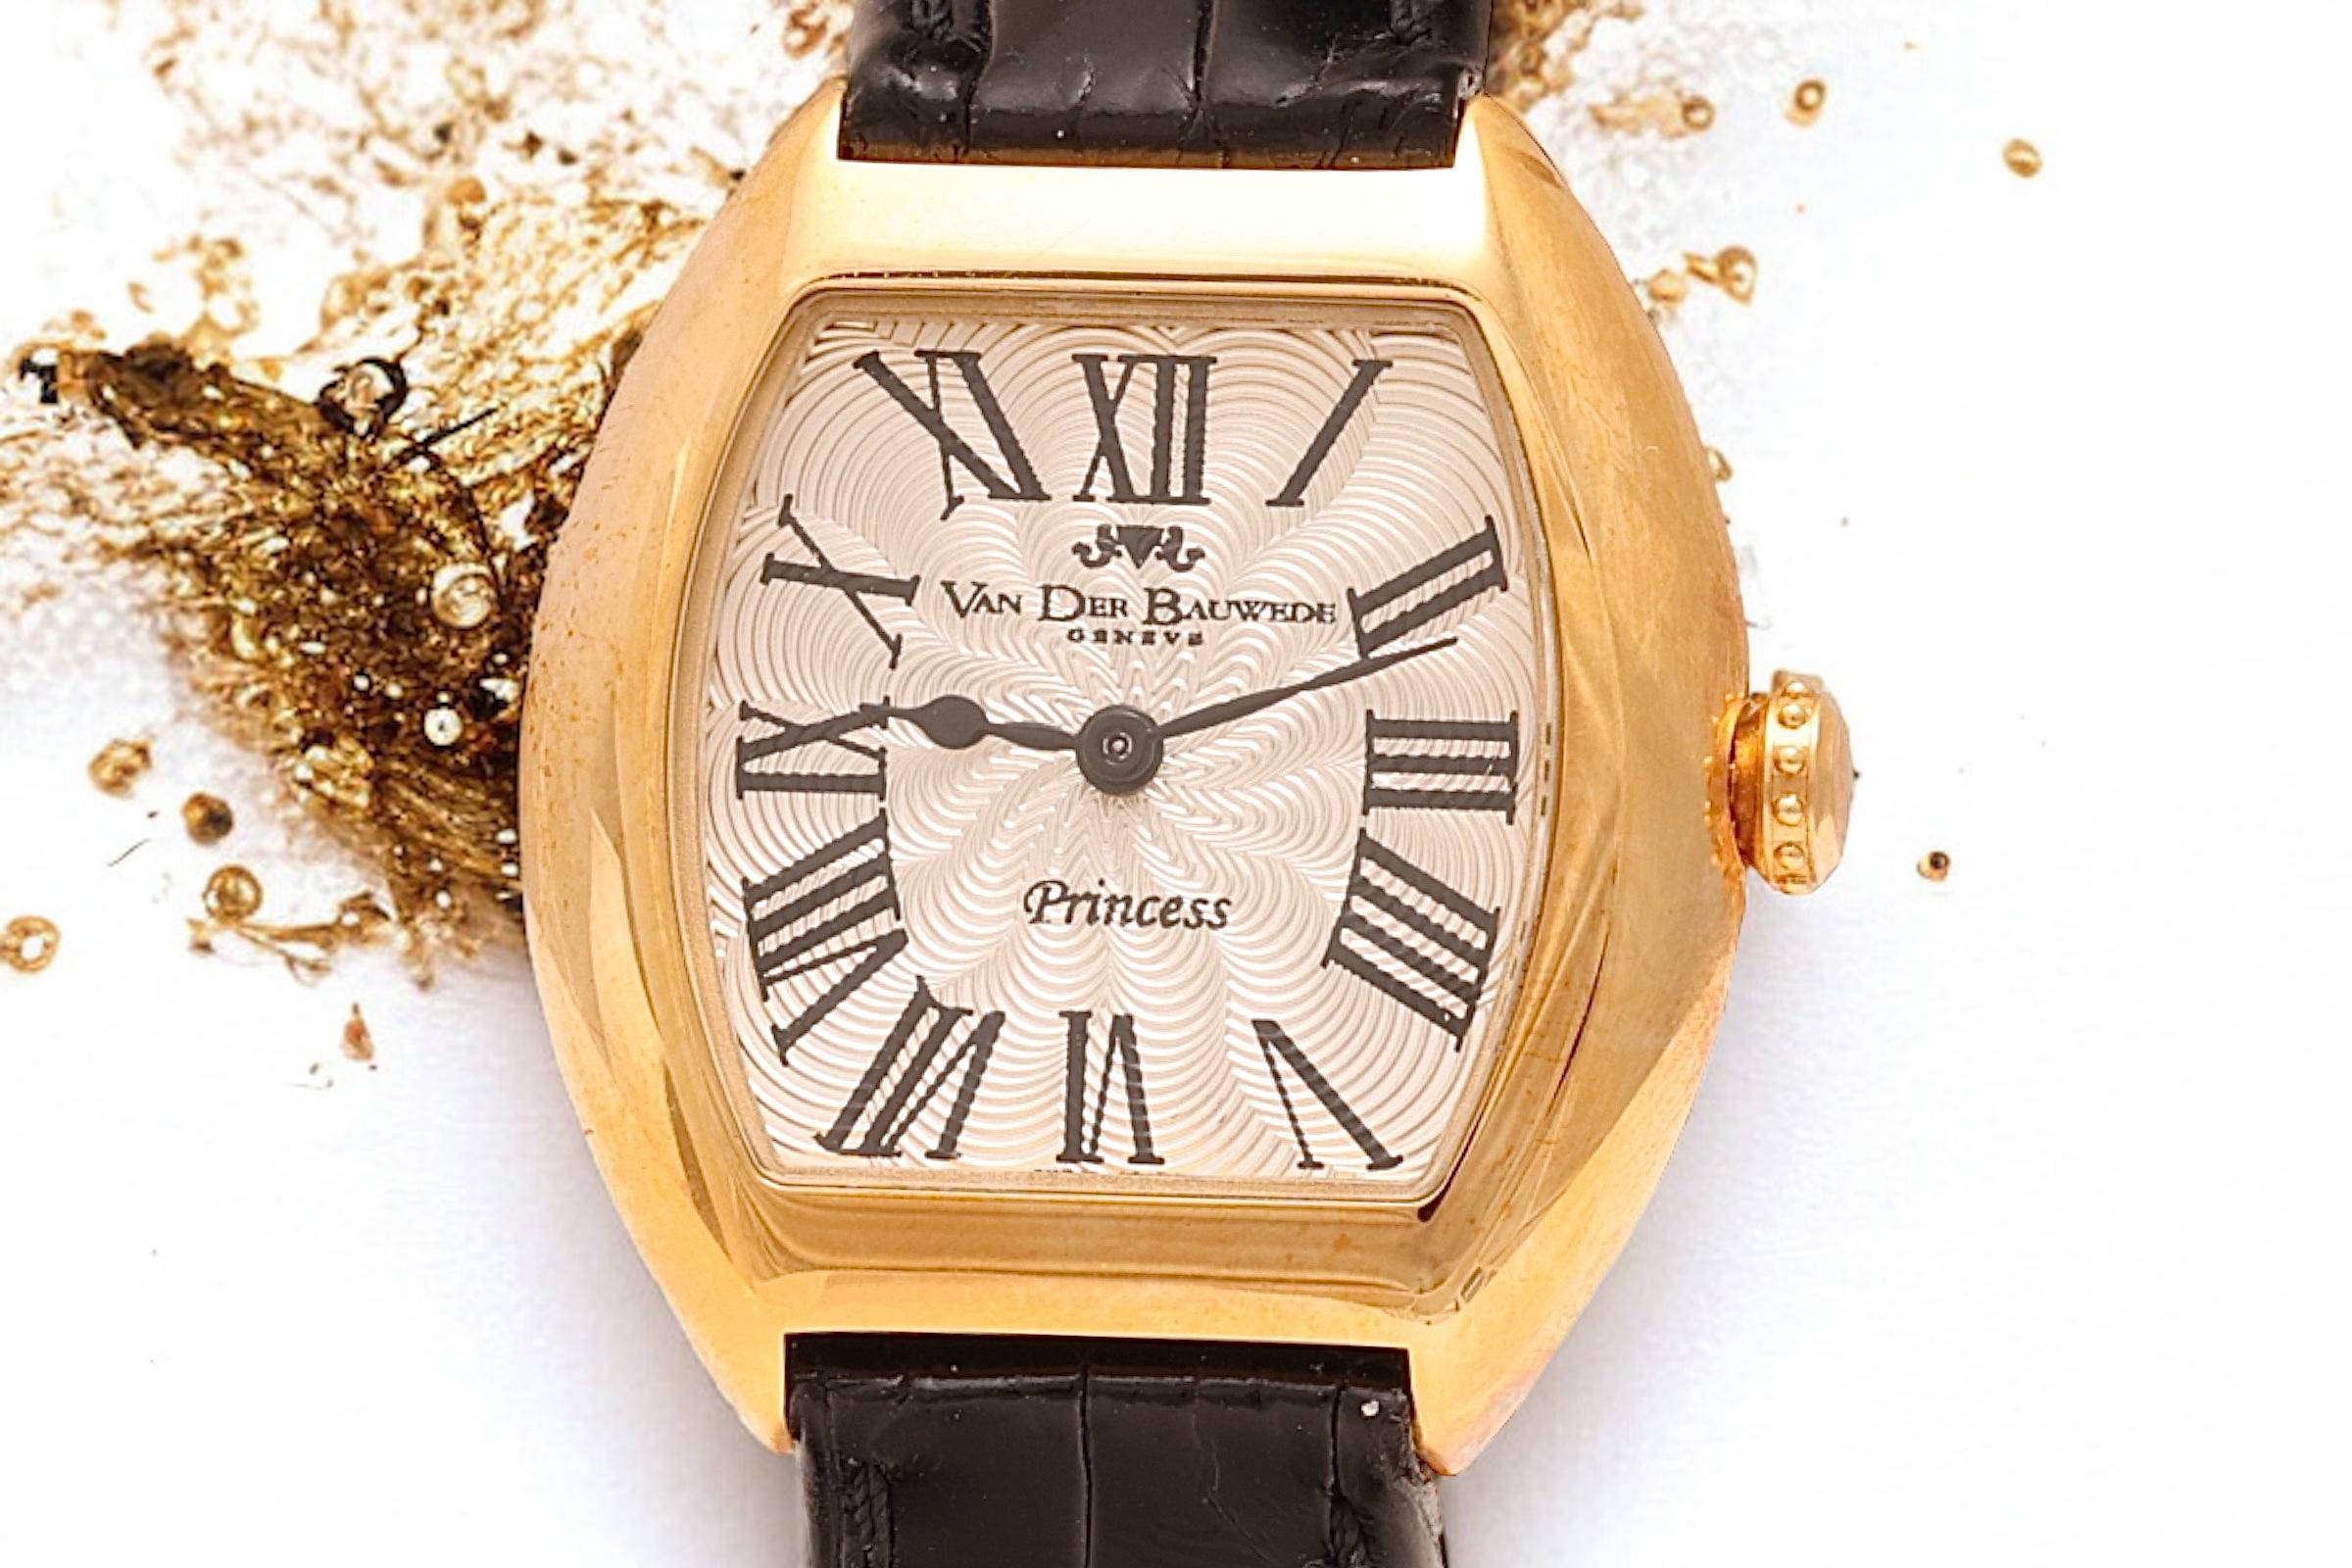 New Van Der Bauwede Princess in 18kt Gold Automatic Wristwatch With Box & Papers For Sale 5